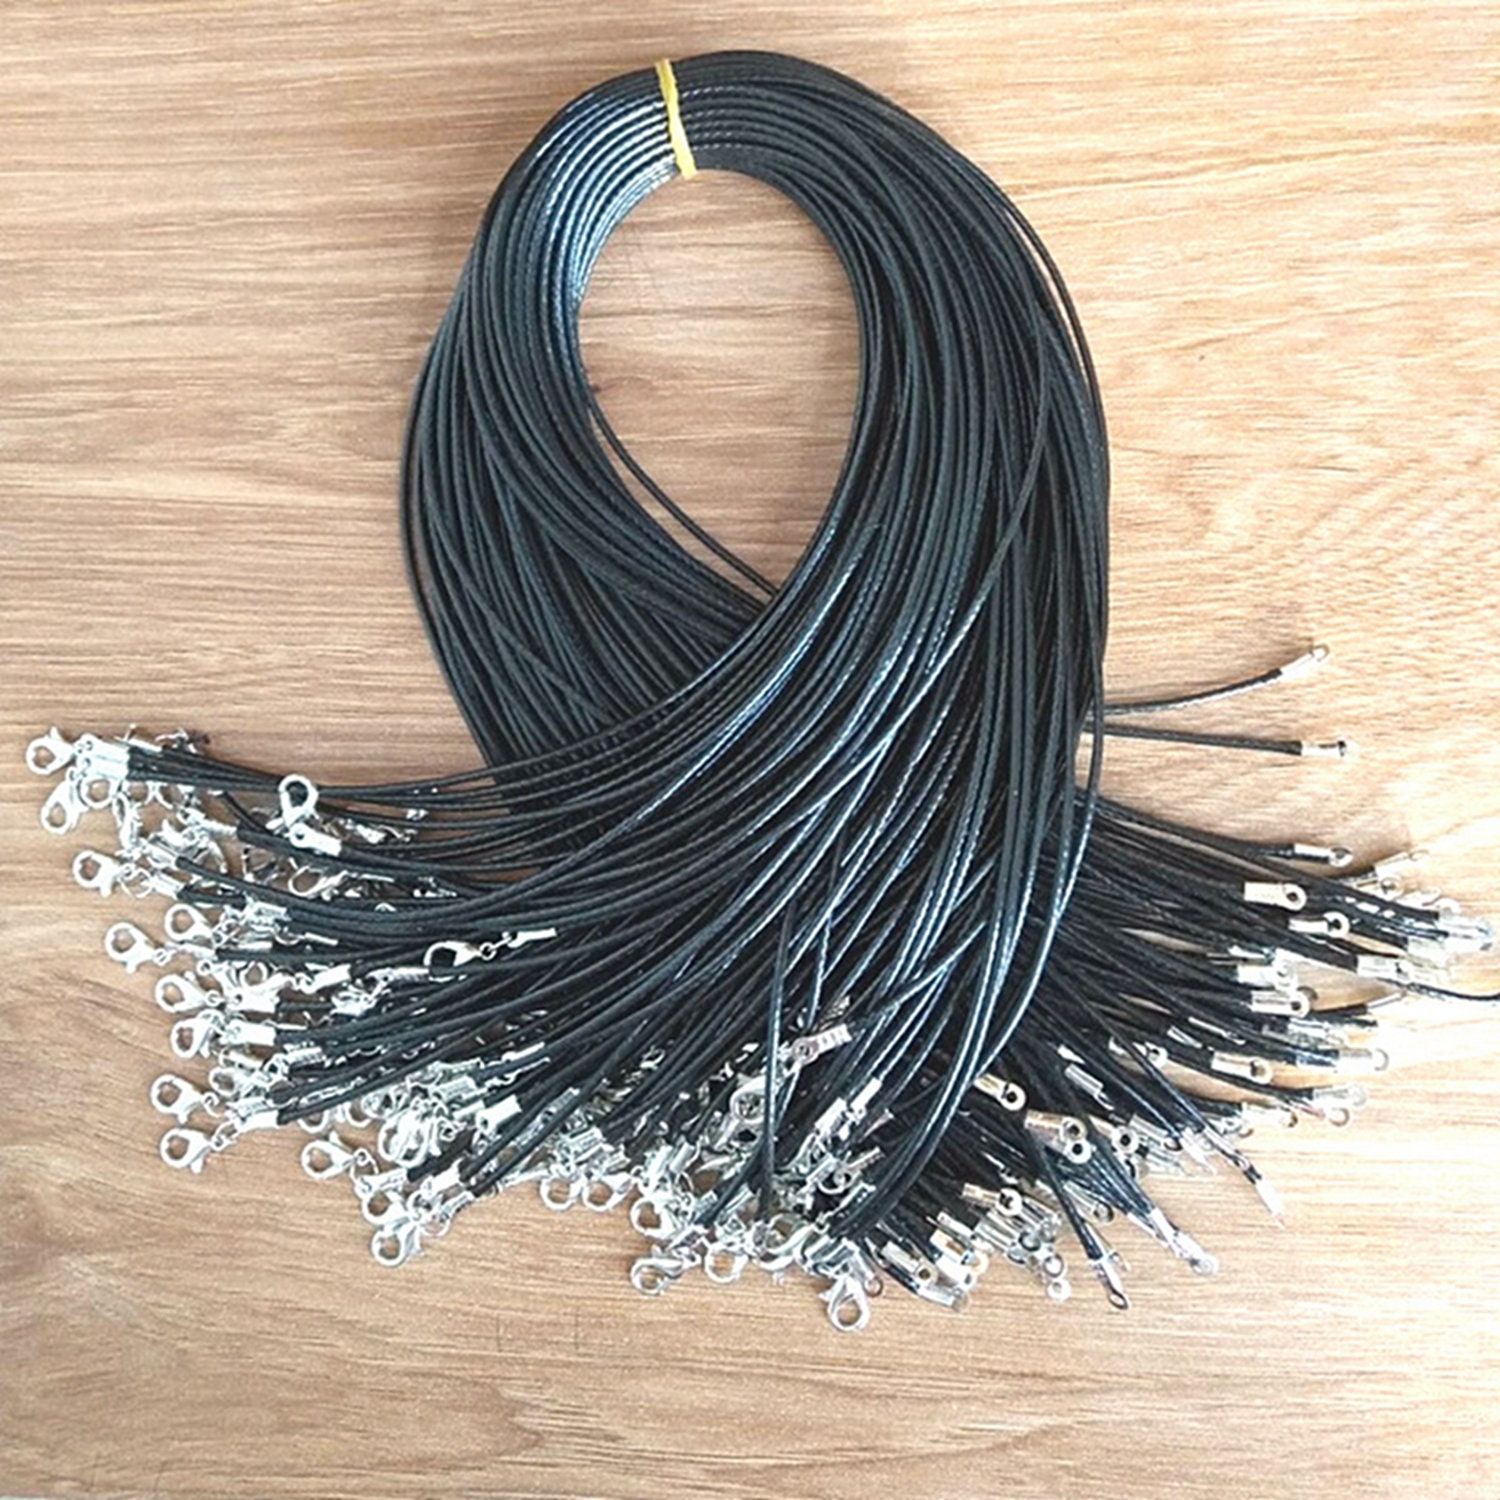 5x Black Waxed Necklace Cord, High Quality 2mm Black Braided Waxed Necklace  Cord, 17.5 Adjustable Round Corduroy Cord C696 